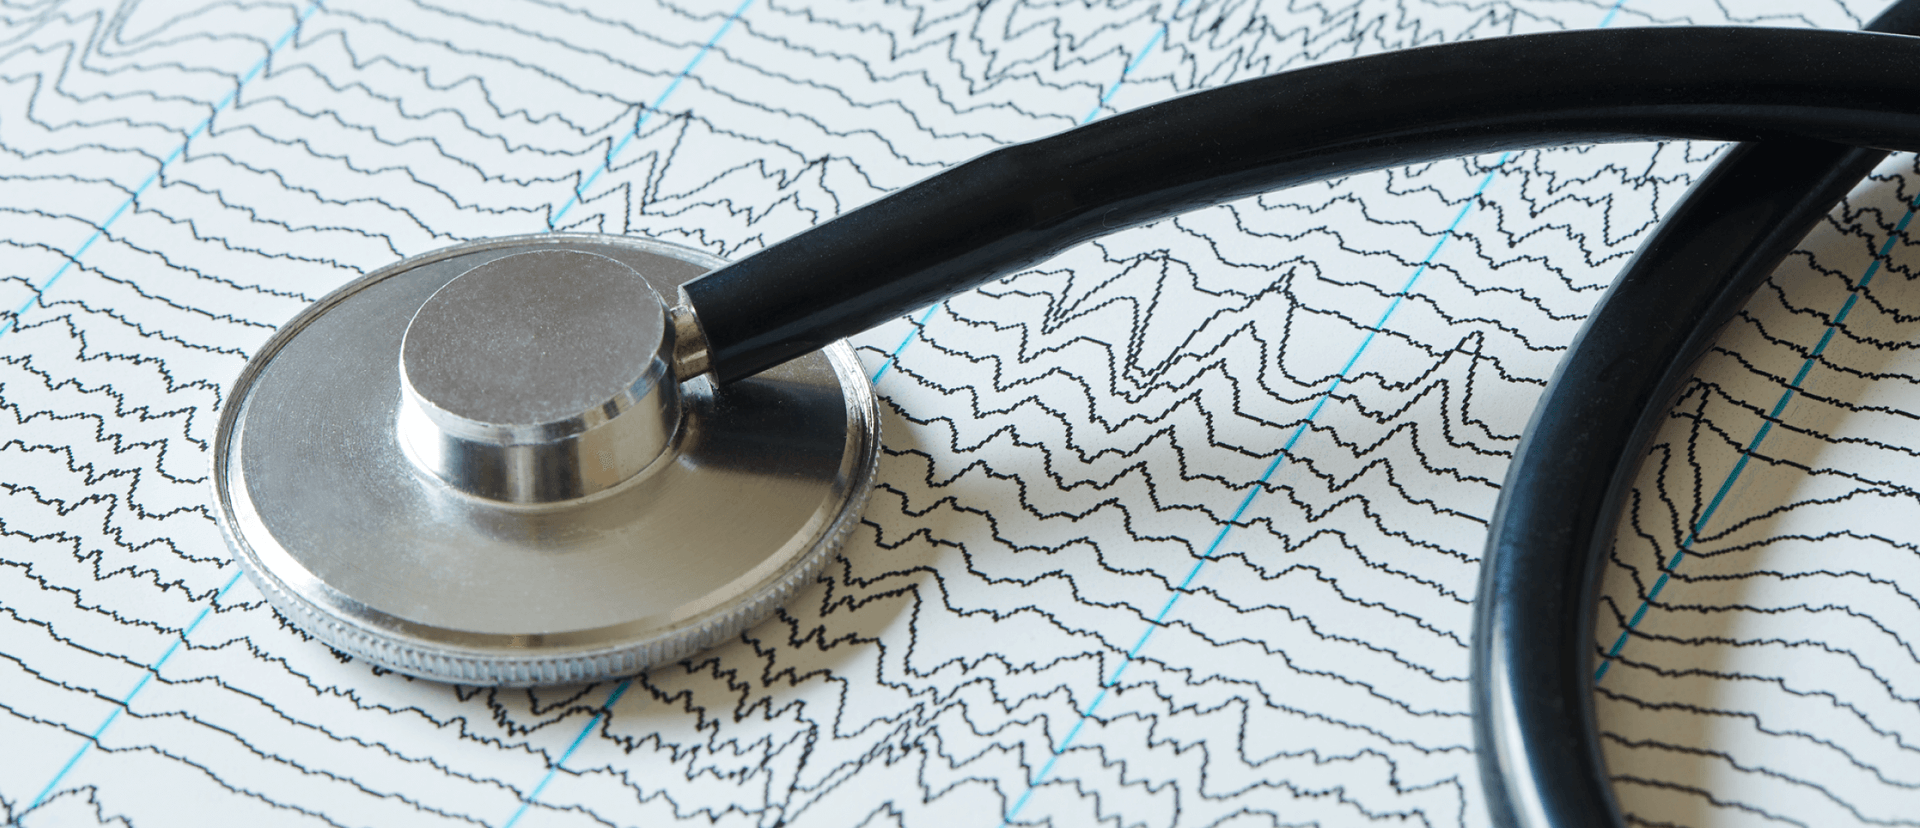 A stethoscope on EEG paper background